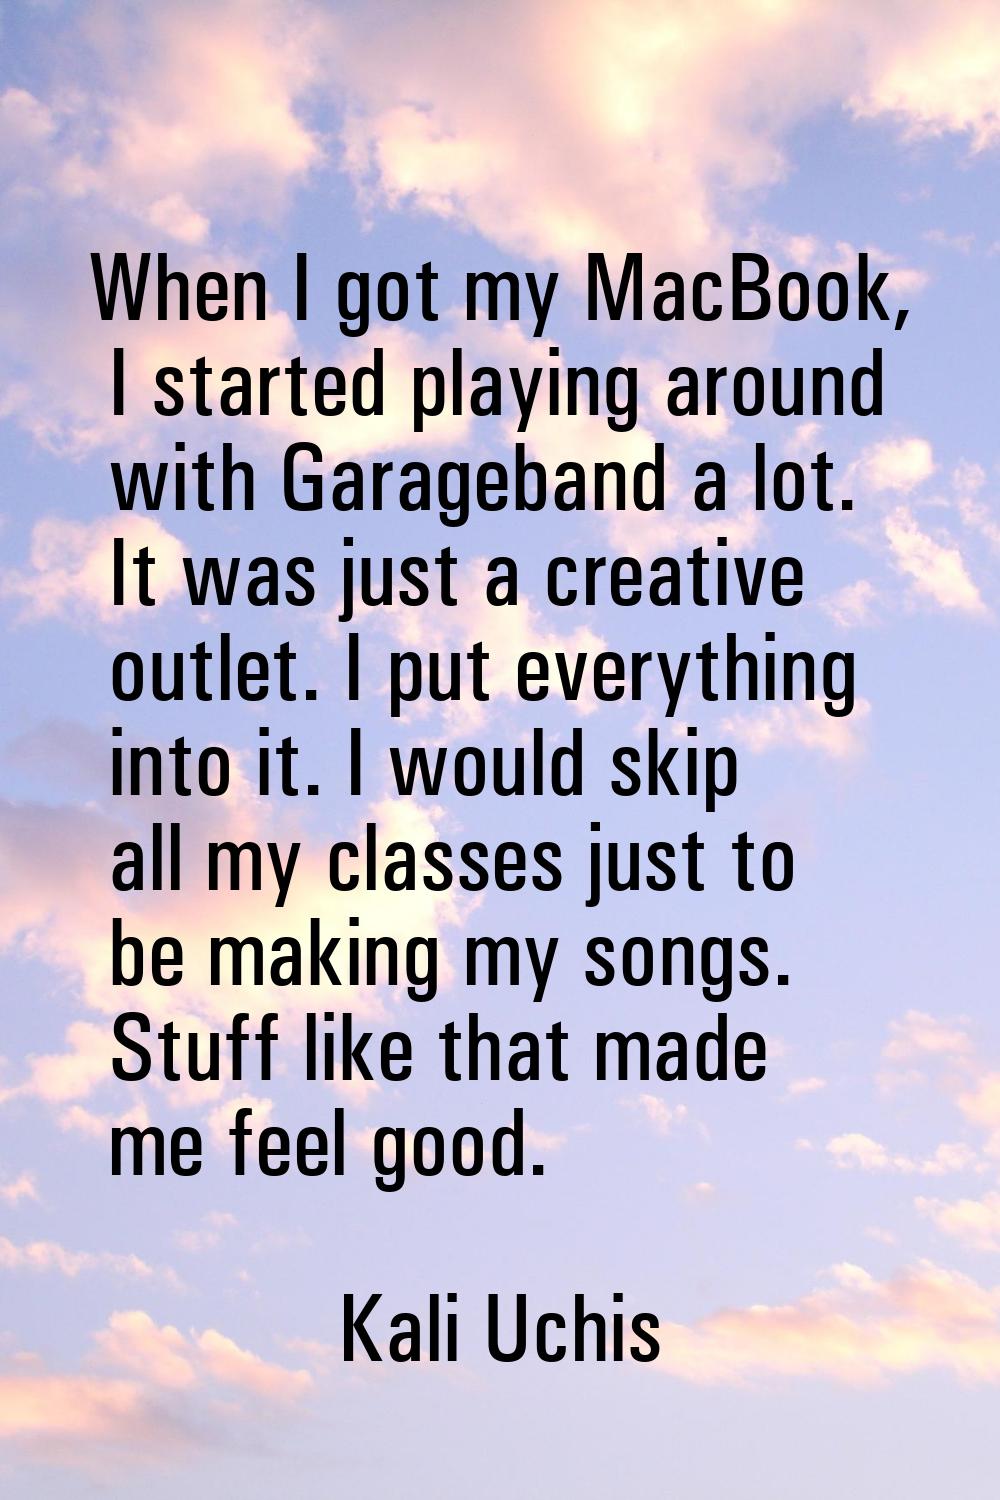 When I got my MacBook, I started playing around with Garageband a lot. It was just a creative outle